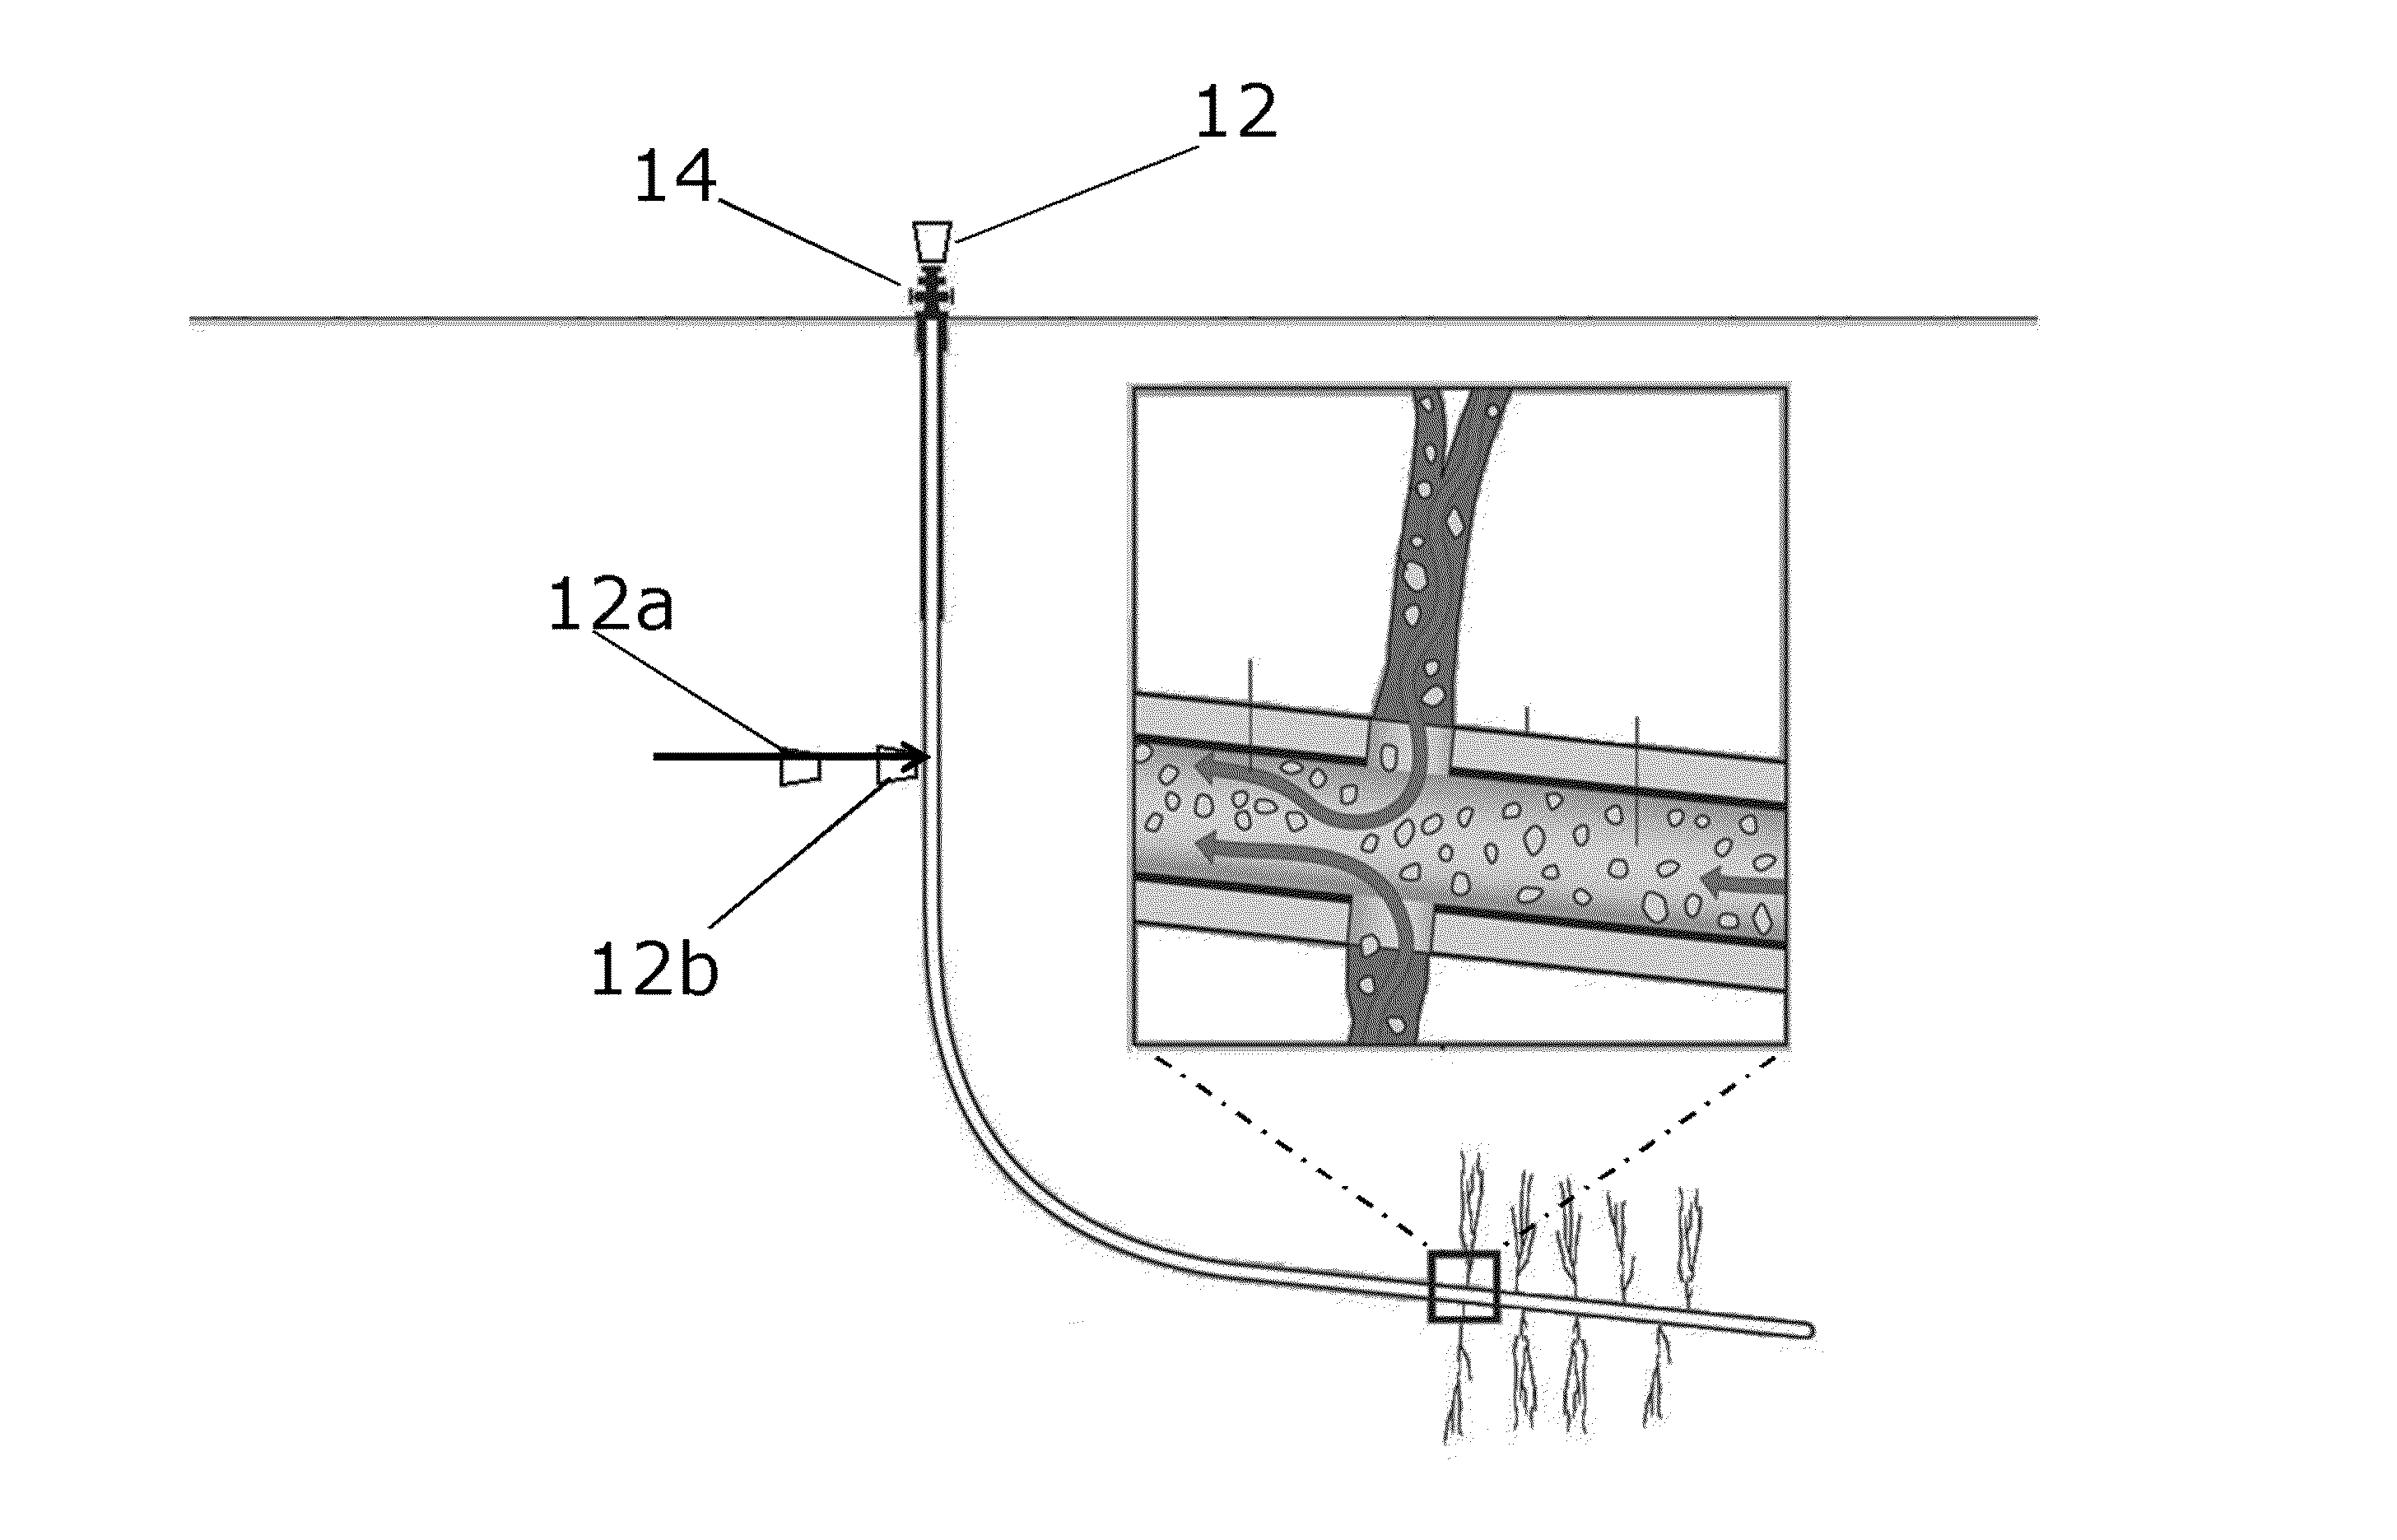 New method and arrangement for feeding chemicals into a hydrofracturing process and oil and gas applications